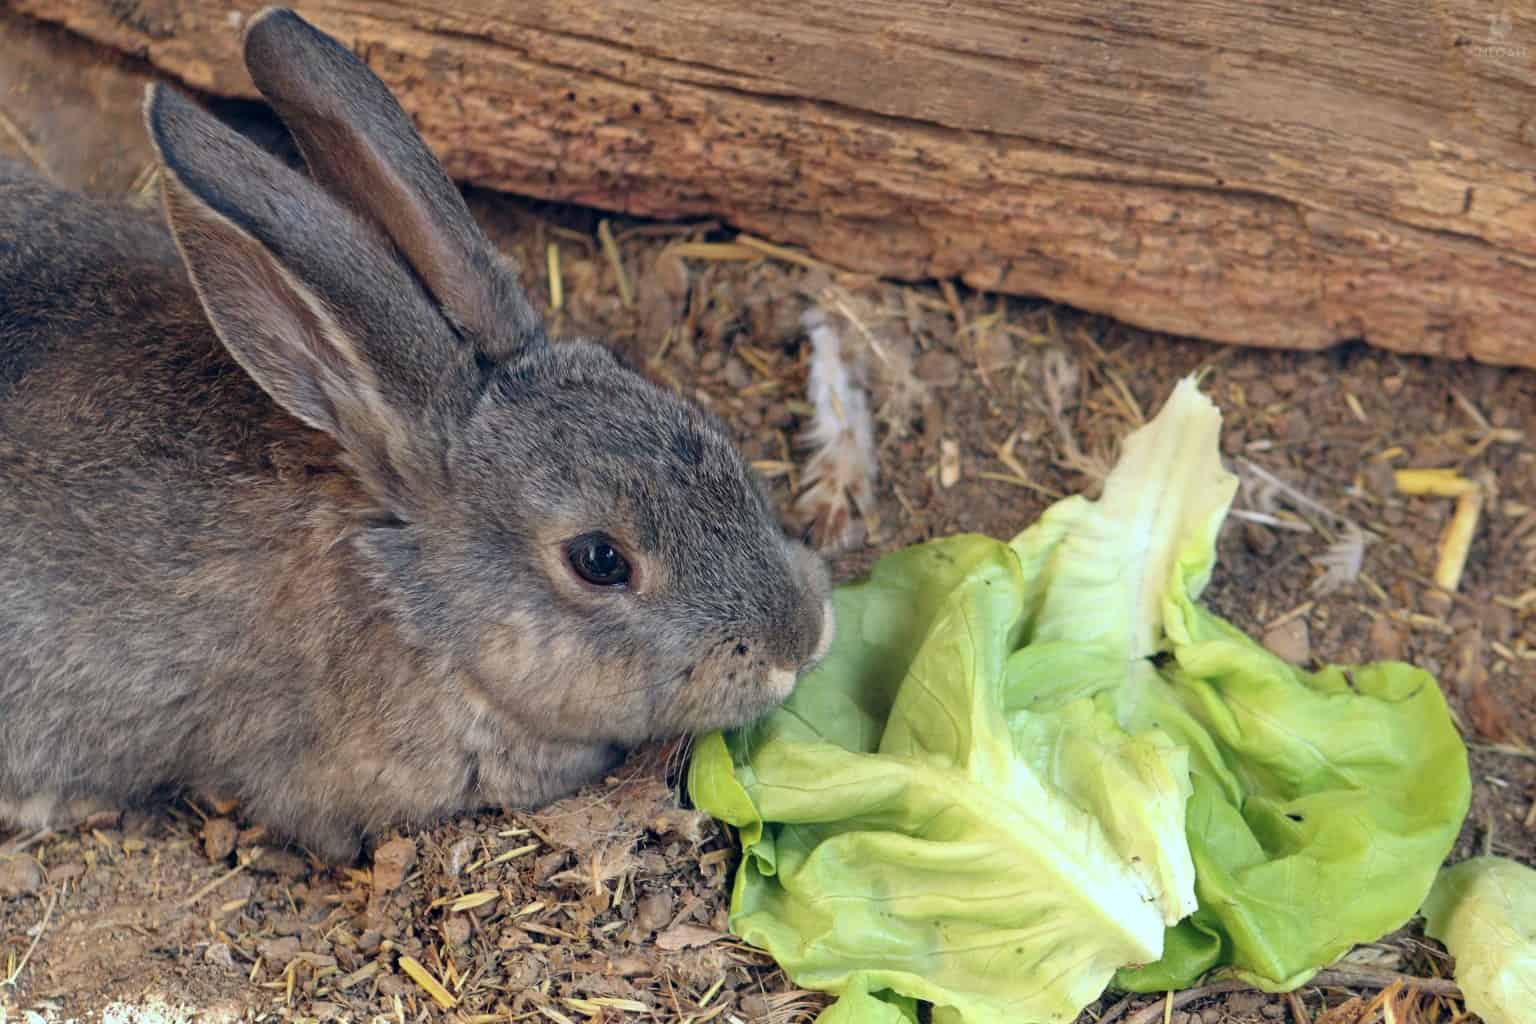 a rabbit nibbling on some lettuce